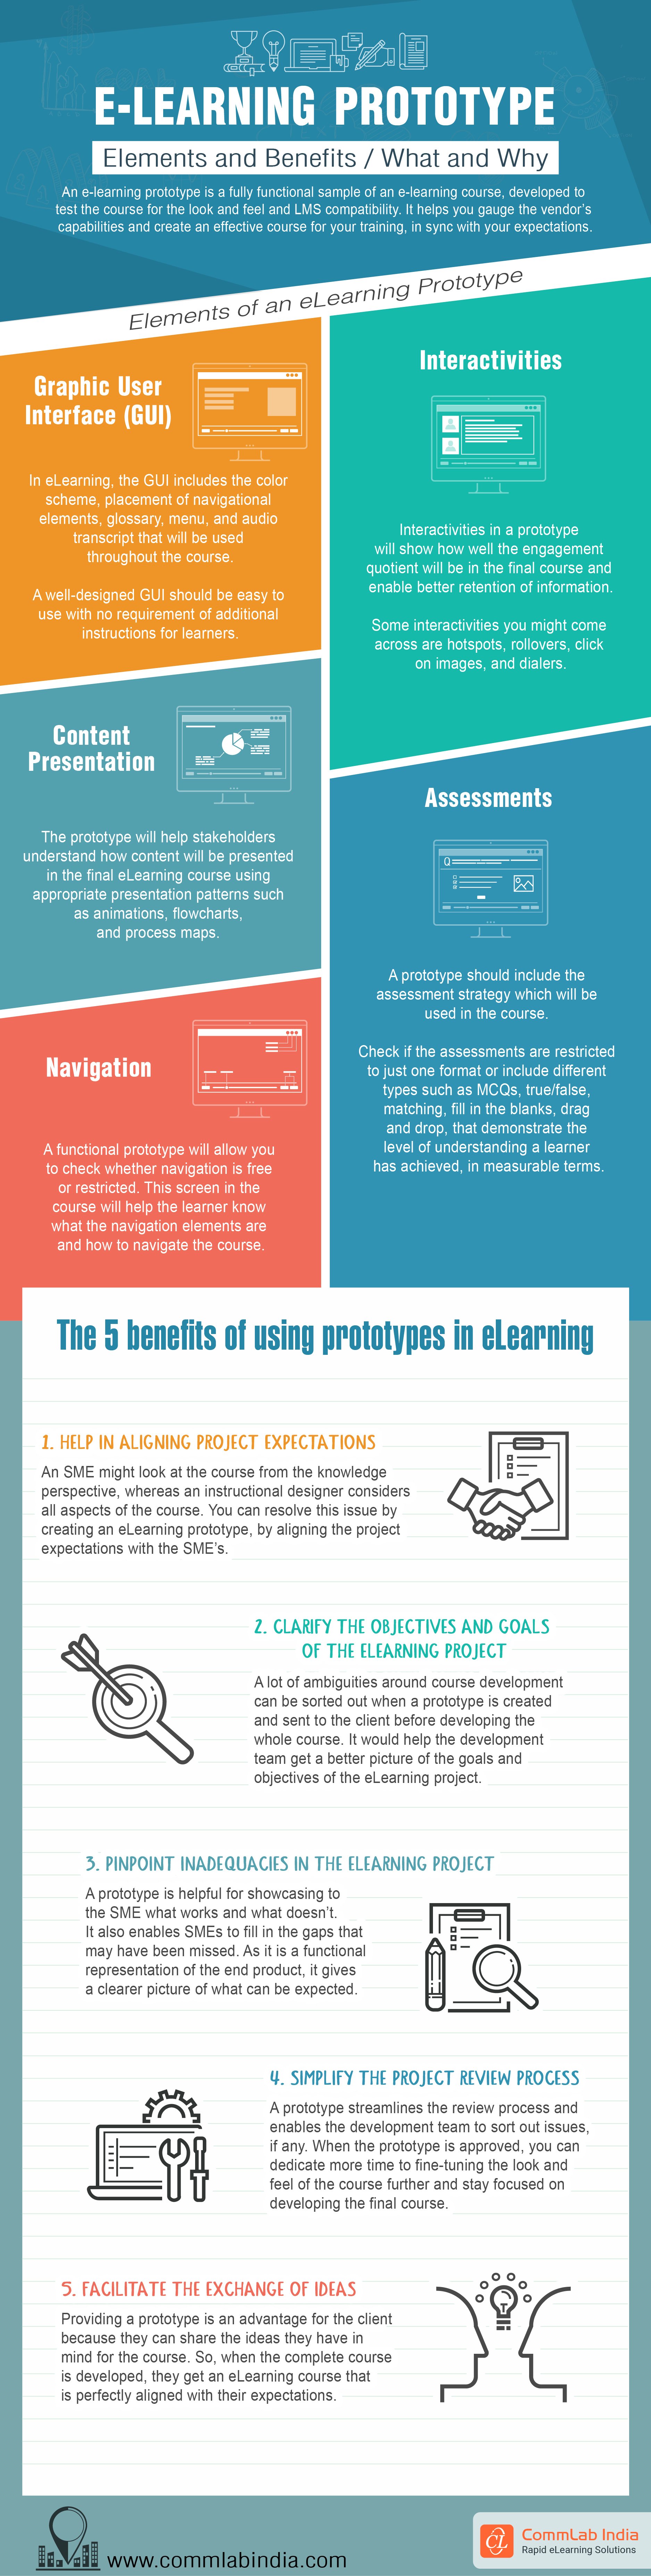 eLearning Prototype: Elements and Benefits/What and Why [Infographic]